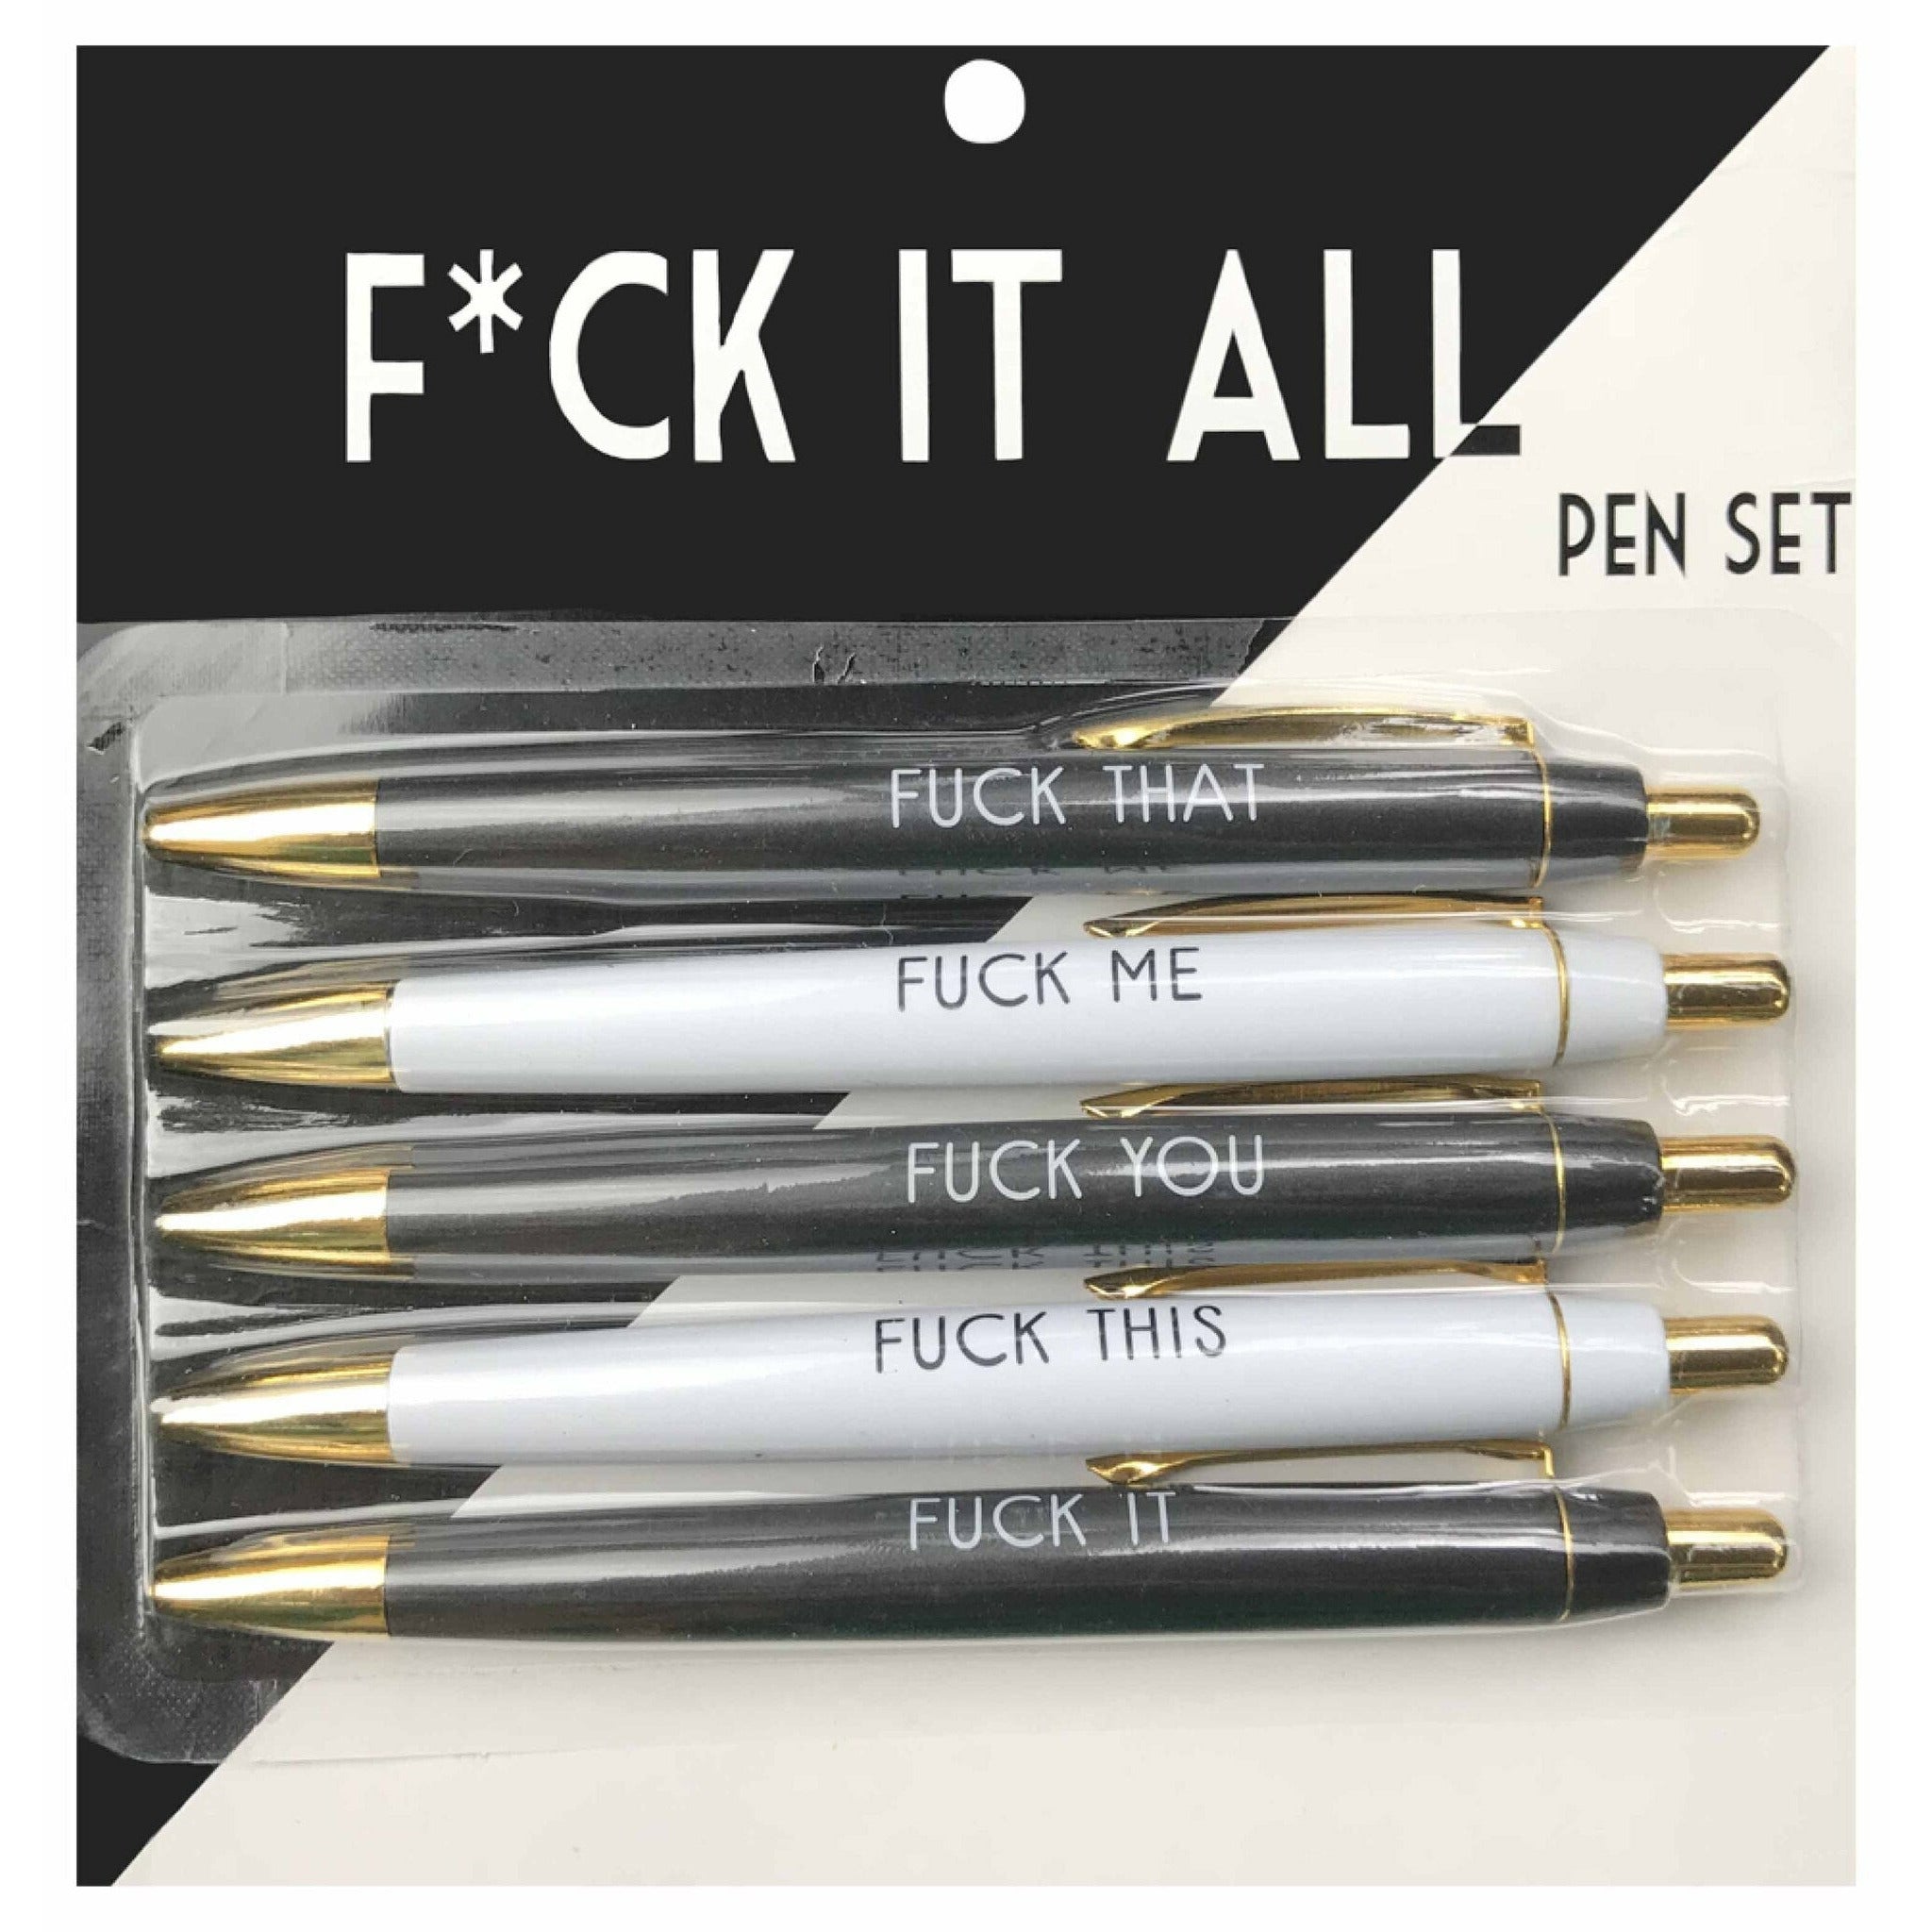 Welcome to the Shit Show Pens Set The Pretty Hot Mess